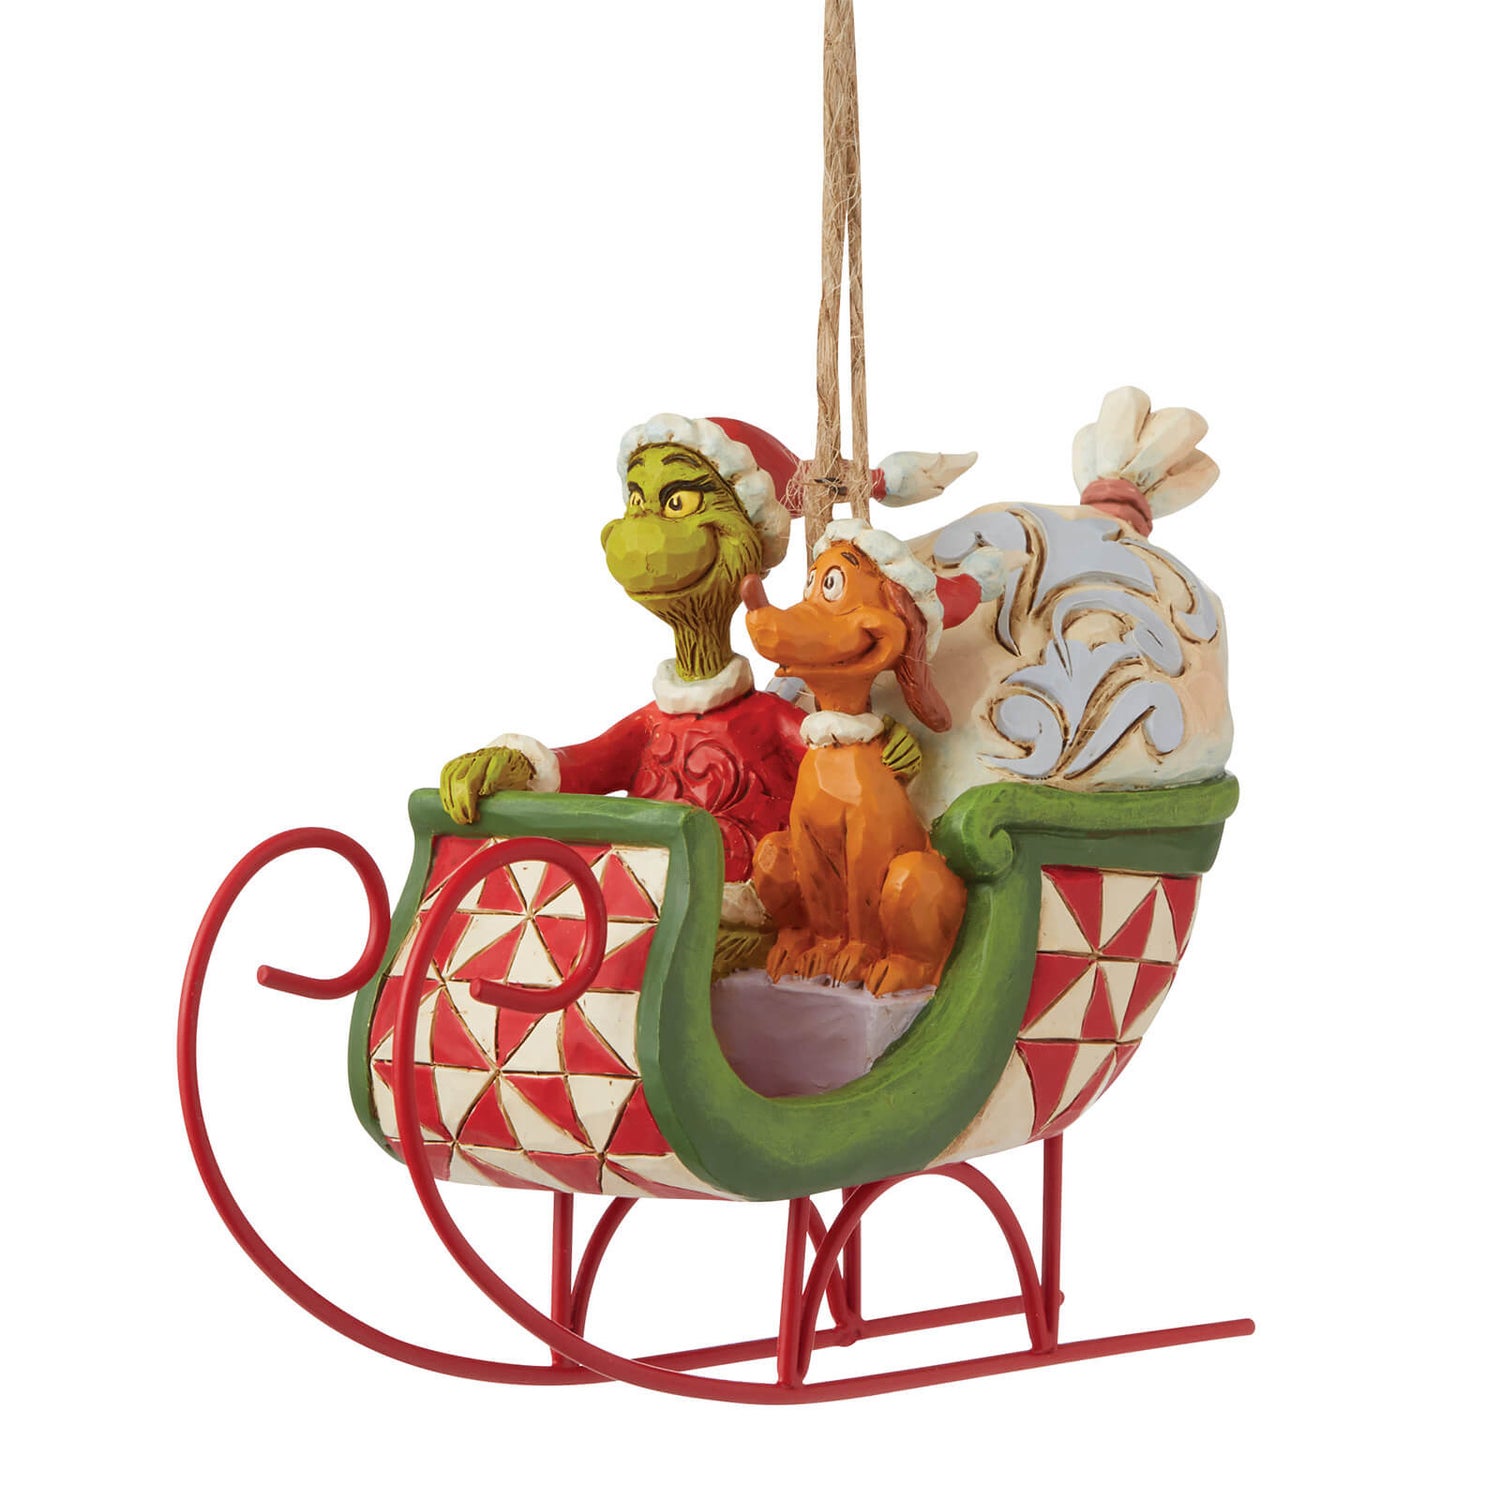 The Grinch By Jim Shore Grinch & Max In Sleigh Hangend Ornament